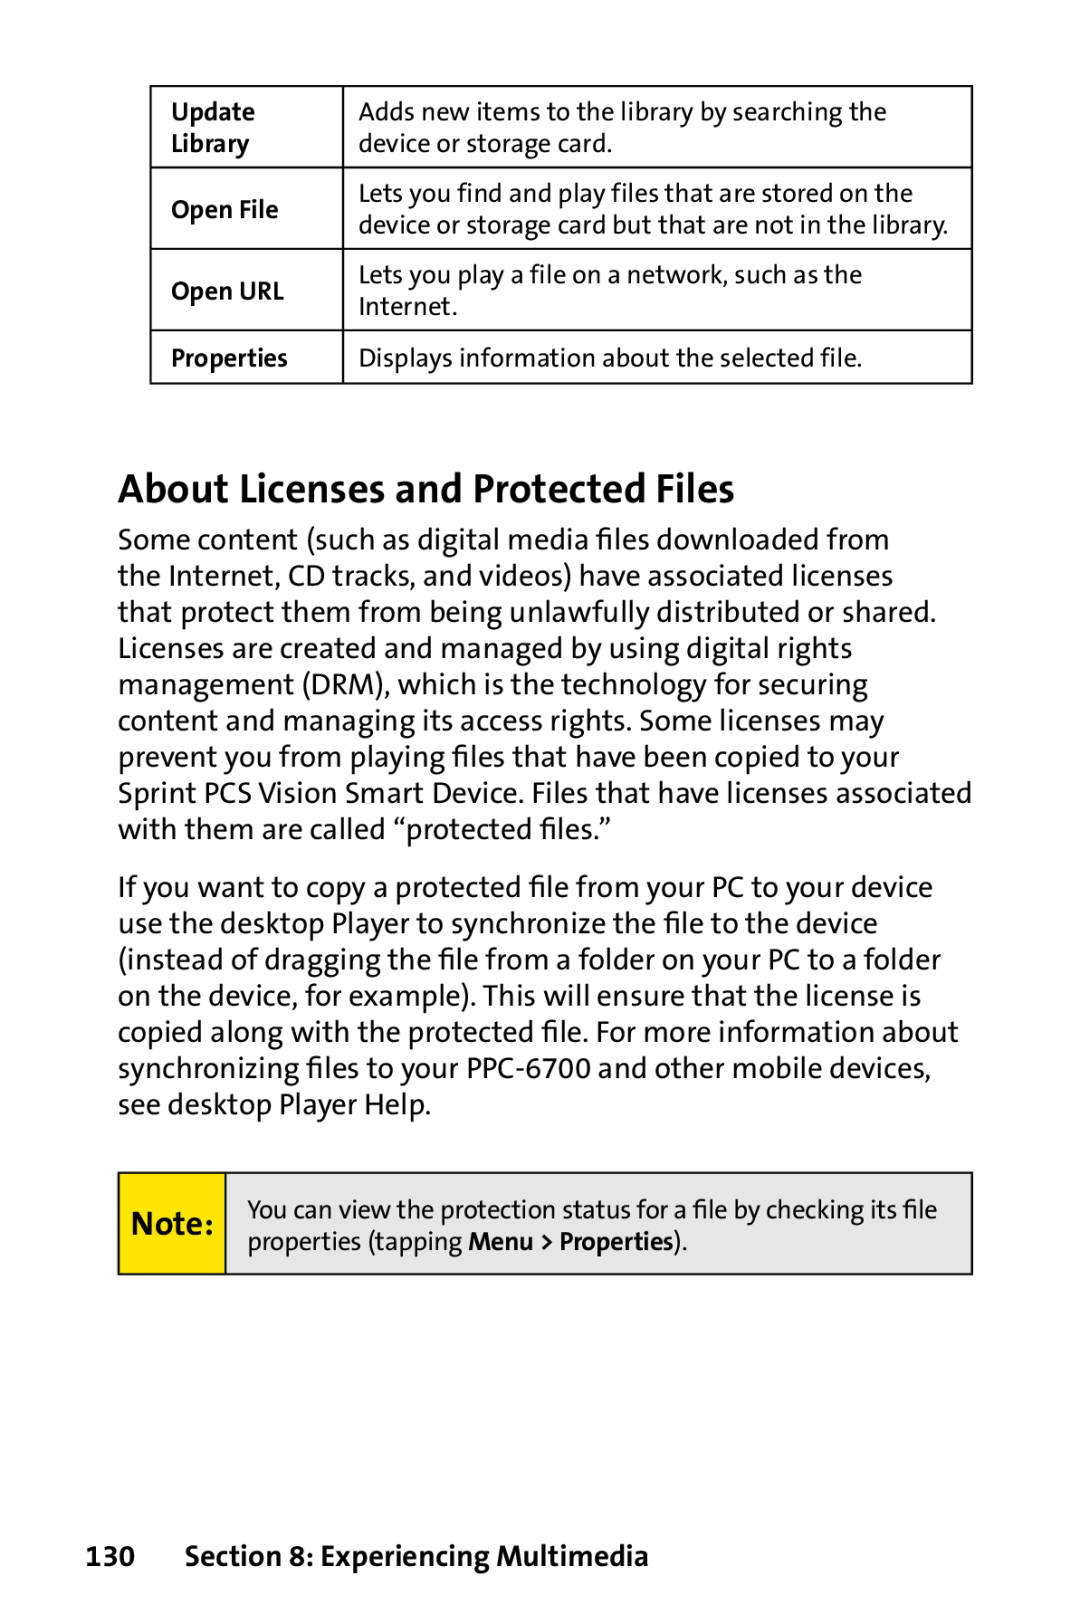 Sprint Nextel PPC-6700 manual About Licenses and Protected Files, Experiencing Multimedia 